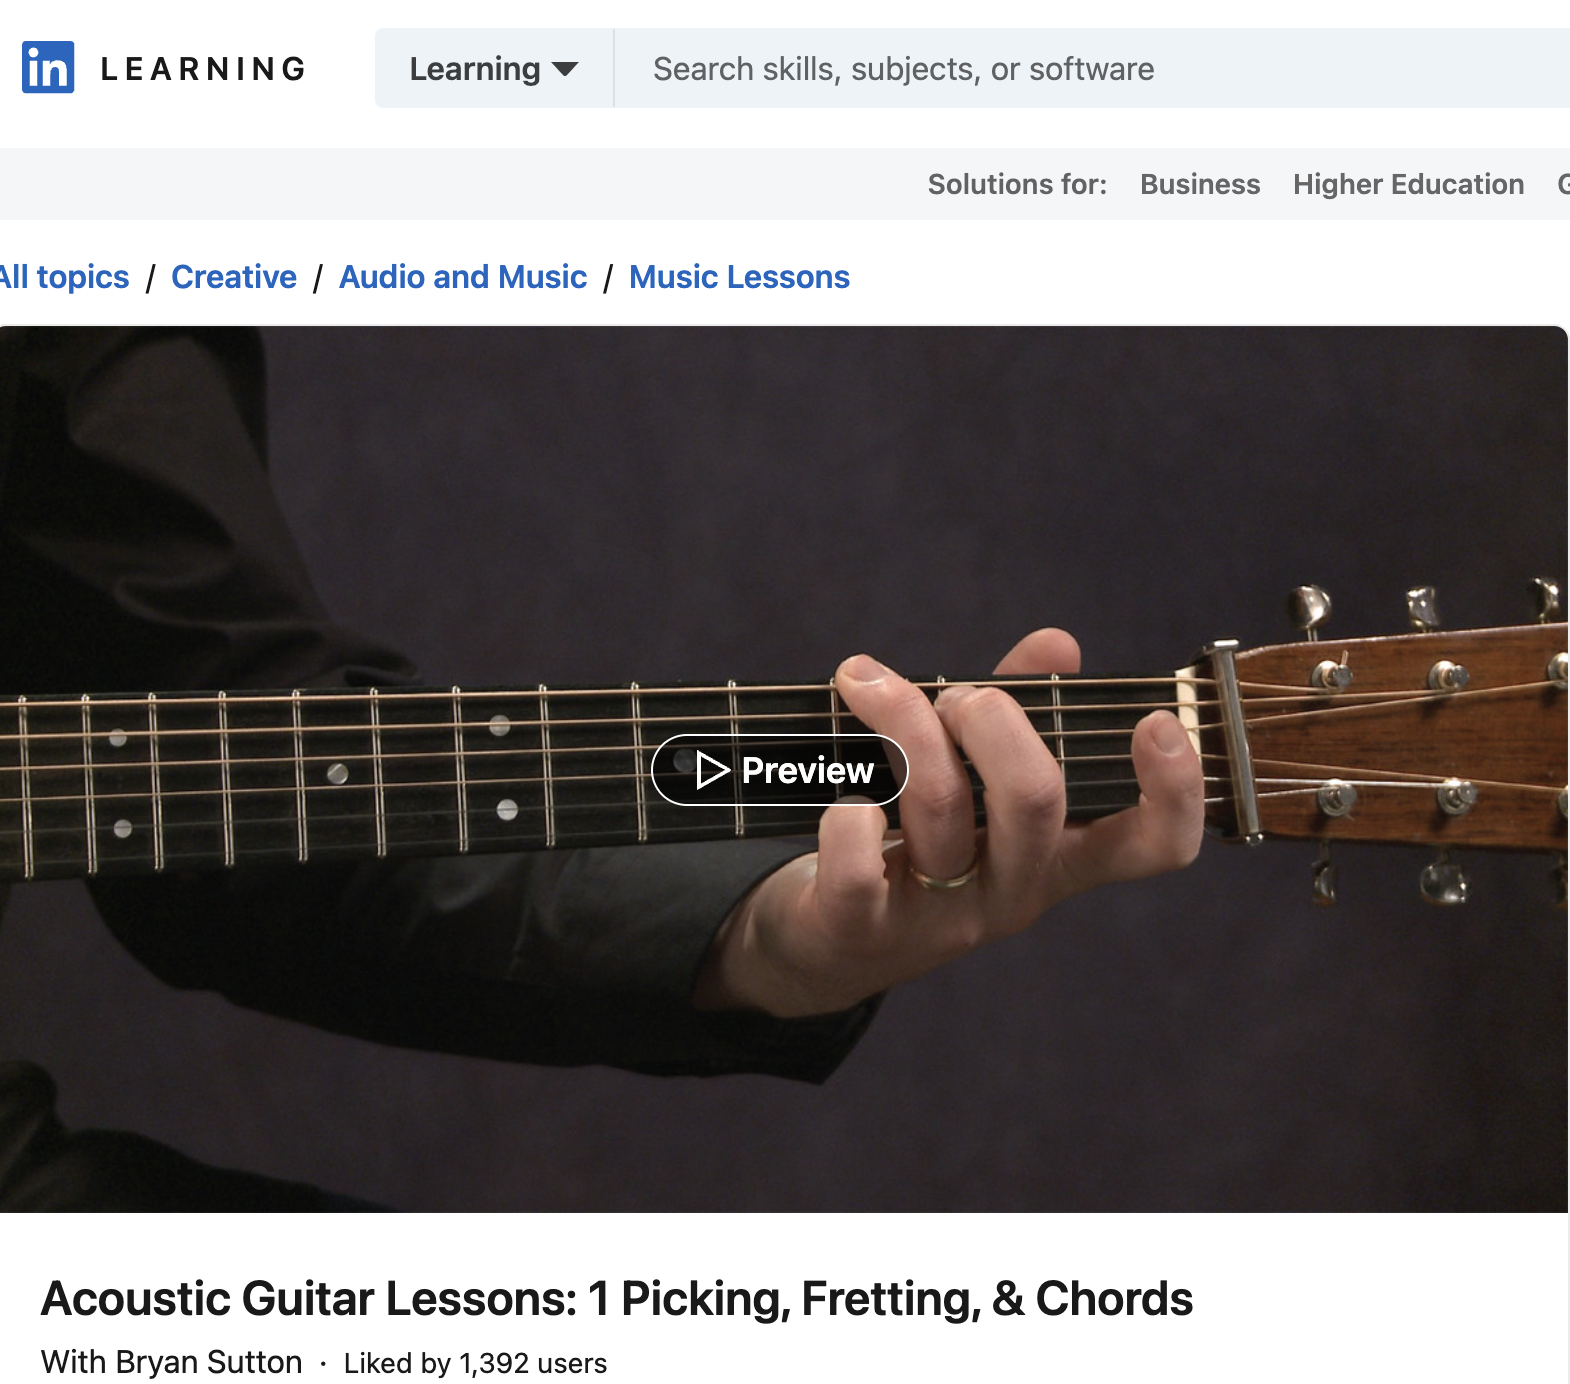 Acoustic Guitar Lessons Picking, Fretting, and Chords